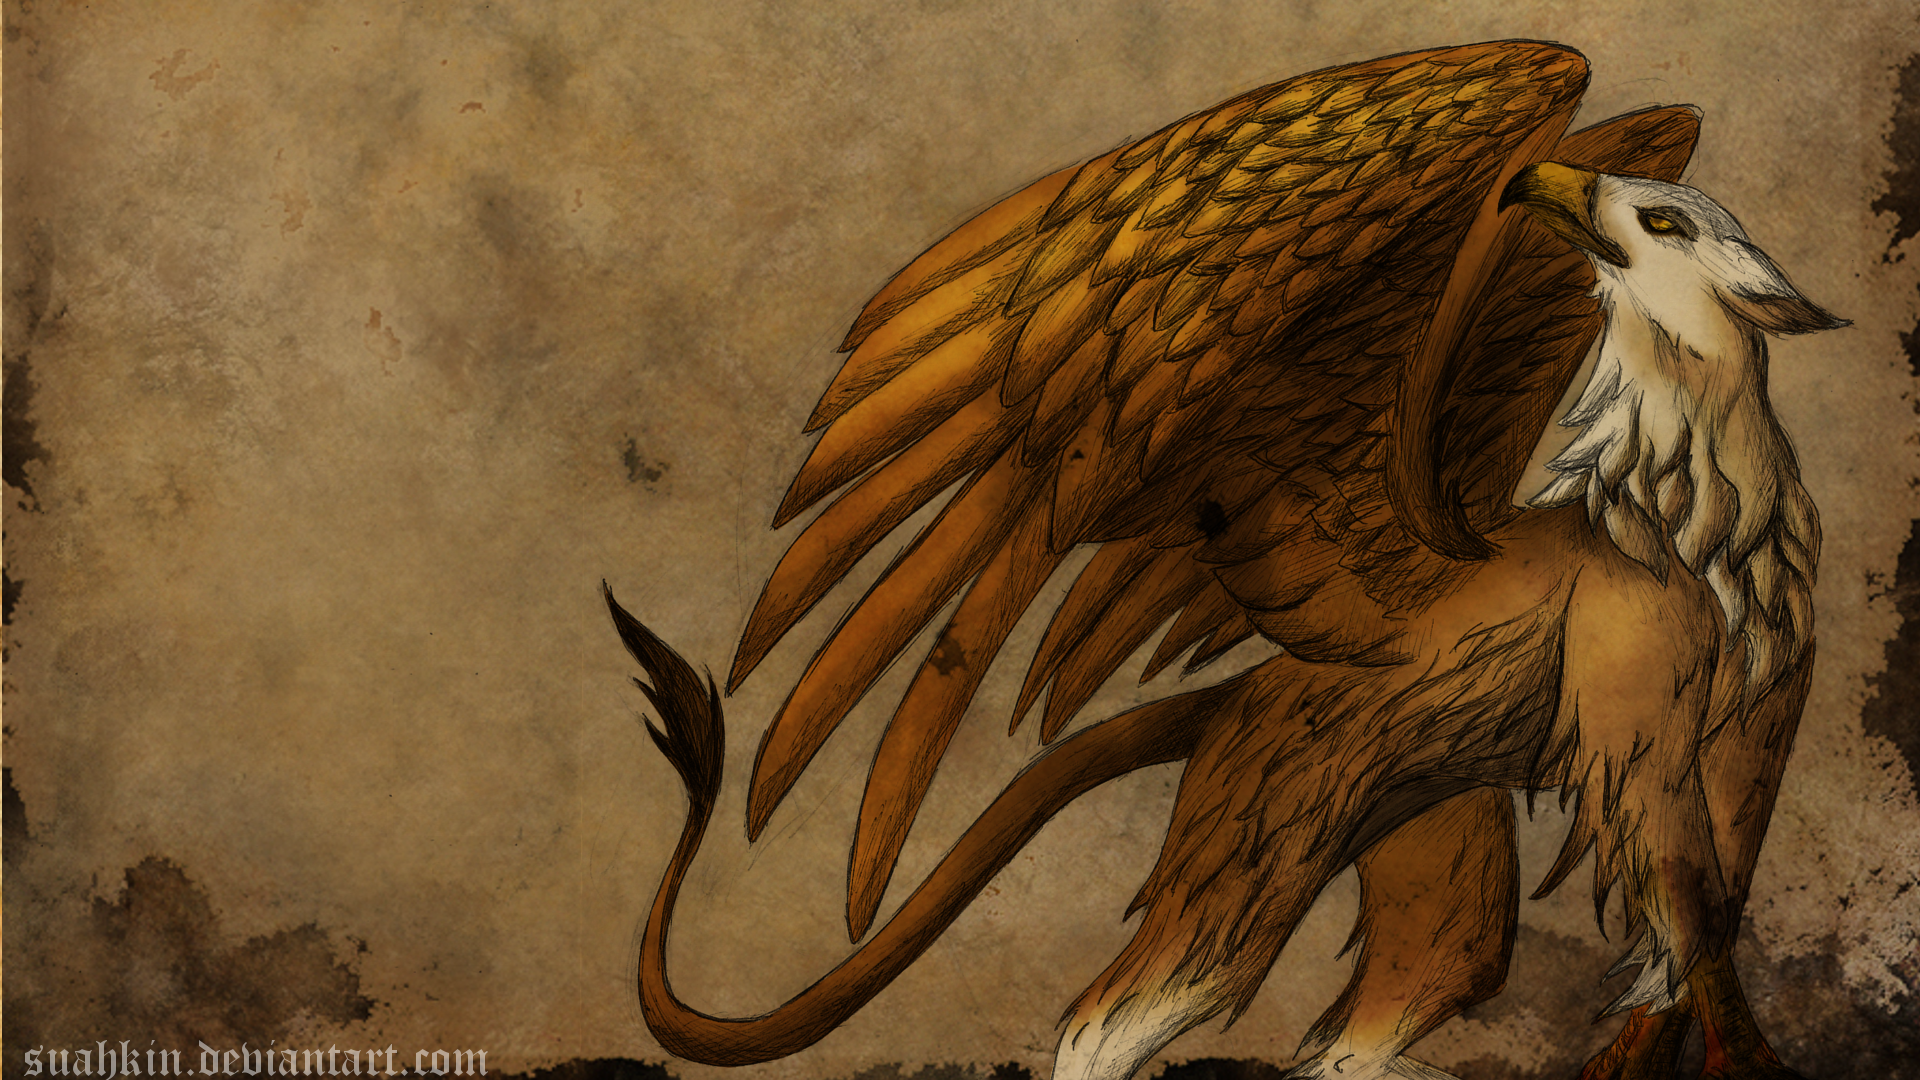 Gryphon Background. Gryphon Wallpaper, Gryphon Background and Black Gryphon Wallpaper